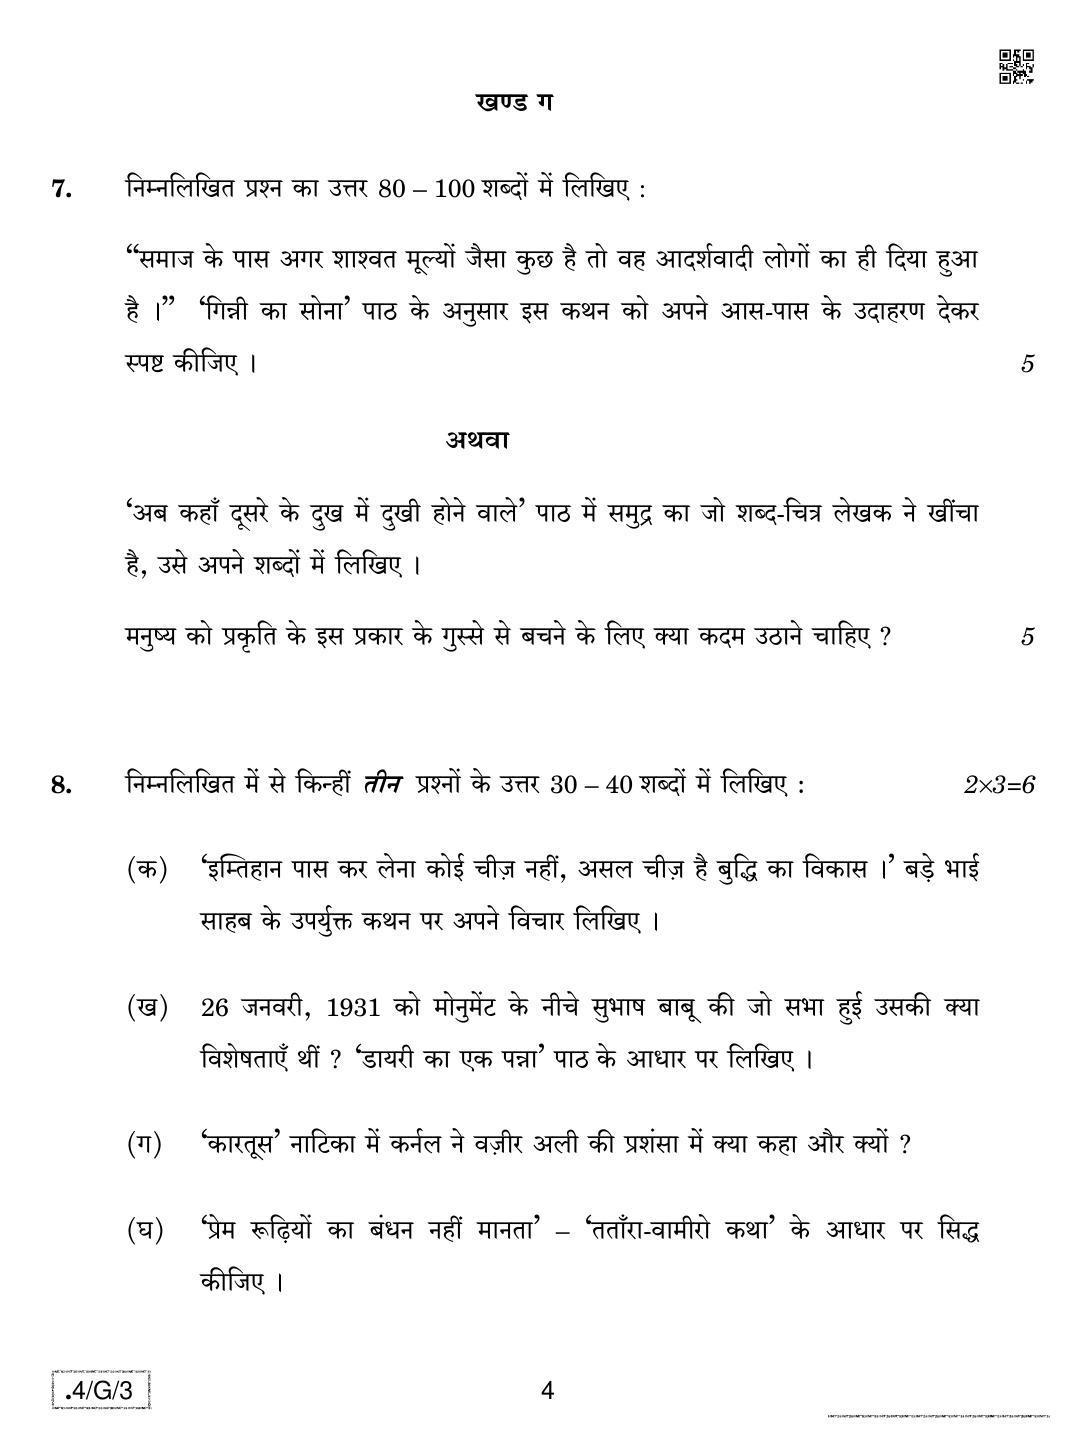 CBSE Class 10 4-C-3 Hindi B 2020 Compartment Question Paper - Page 4